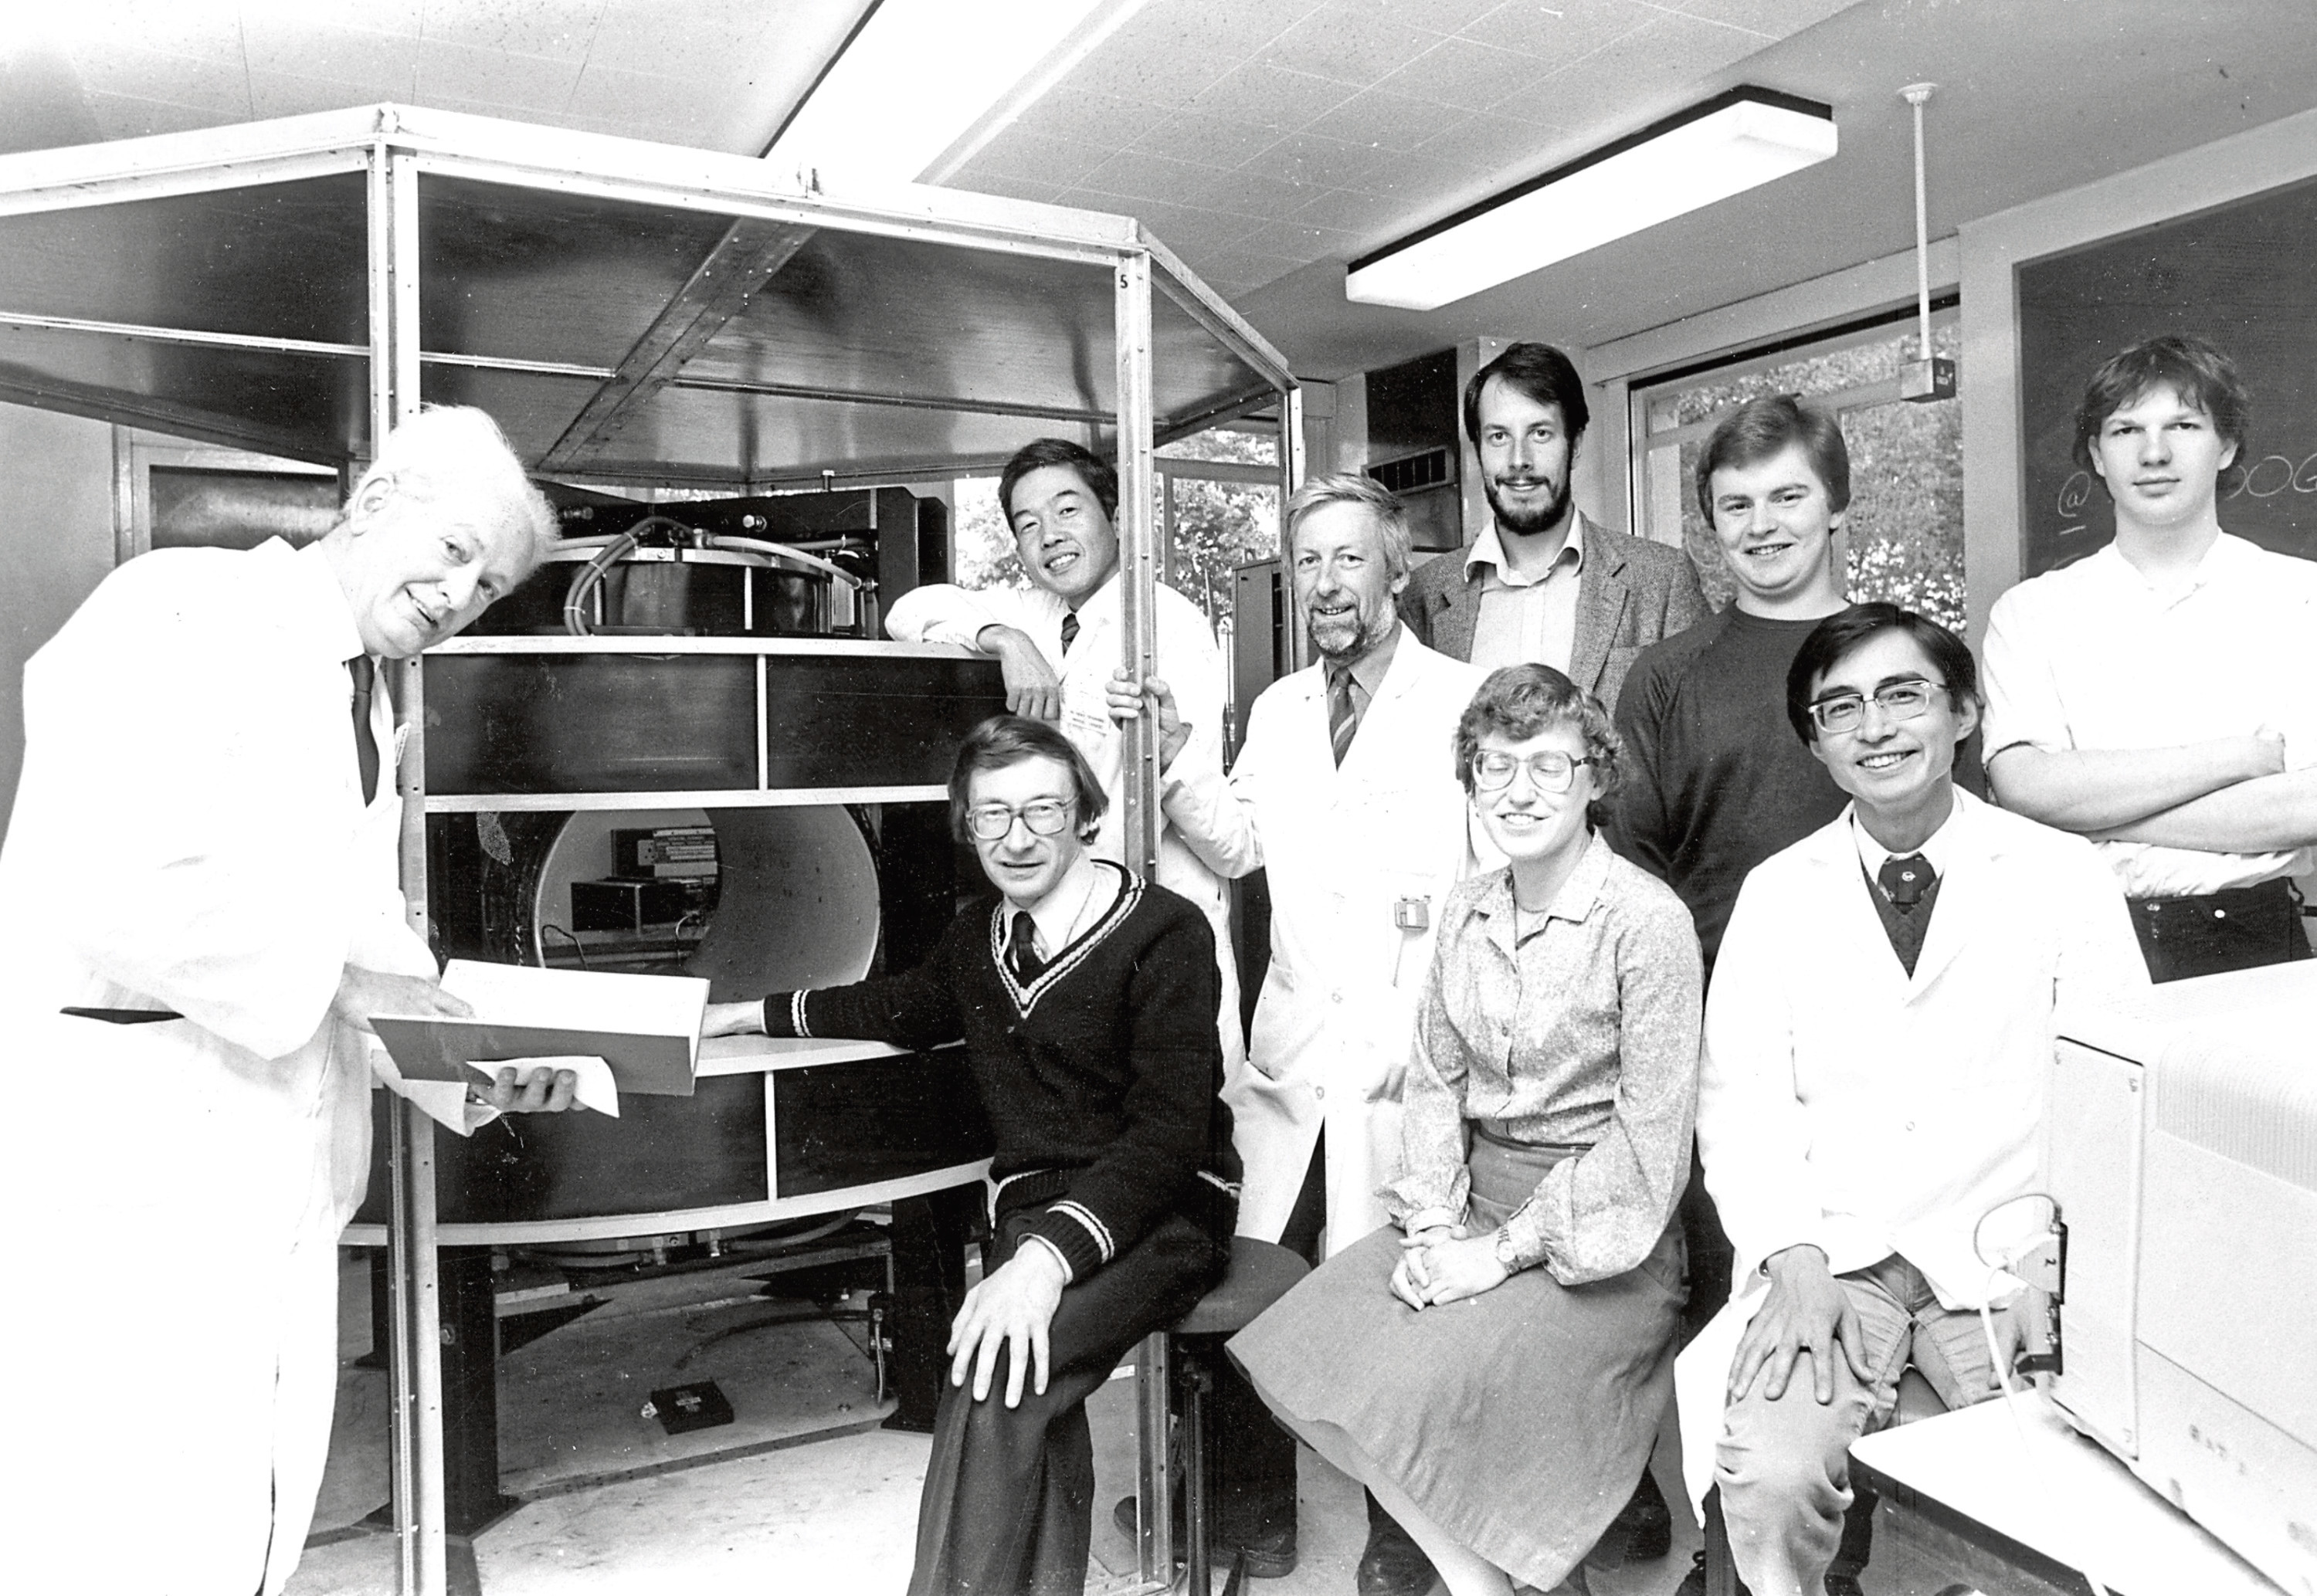 Leading the way for the revolutionary imager, Professor John Mallard (left) with his team from the Department of Medical Physics.